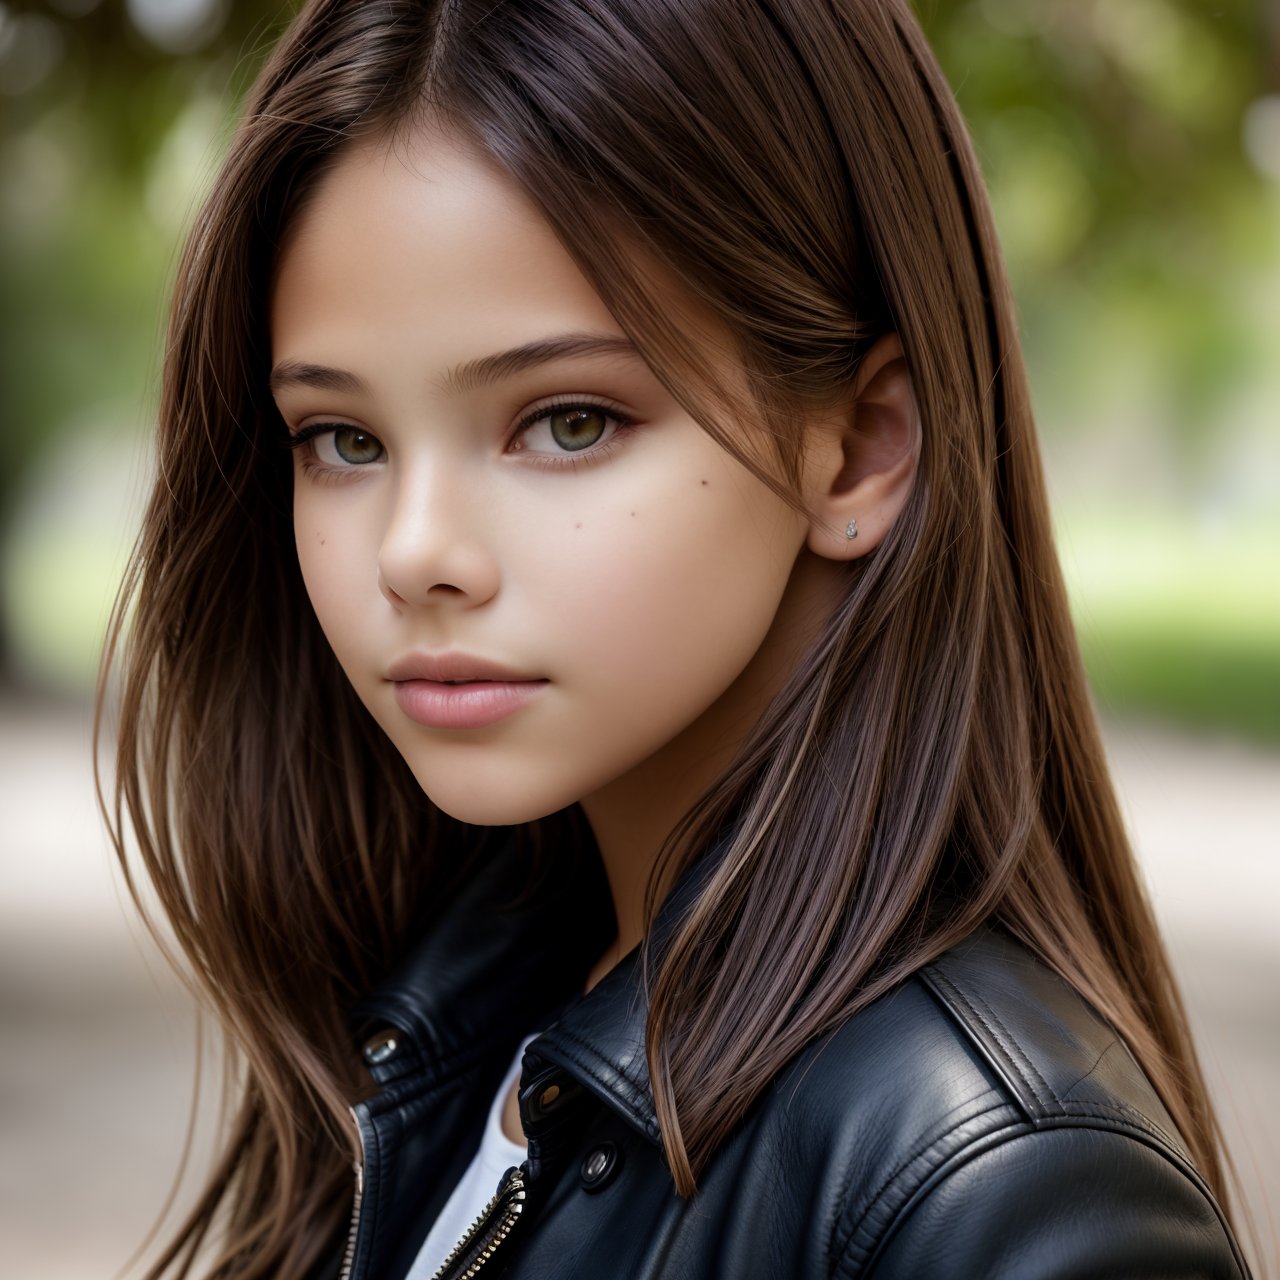 (masterpiece:1.3), best quality, extra resolution, wallpaper, view from above, close up portrait of beautiful (AIDA_LoRA_LG2014:1.13) <lora:AIDA_LoRA_LG2014:0.73> as little girl wearing a leather jacket standing in the park next to the tree, outdoors, pretty face, seductive, dramatic, composition, studio photo, studio photo, kkw-ph1, hdr, f1.8, (colorful:1.1)